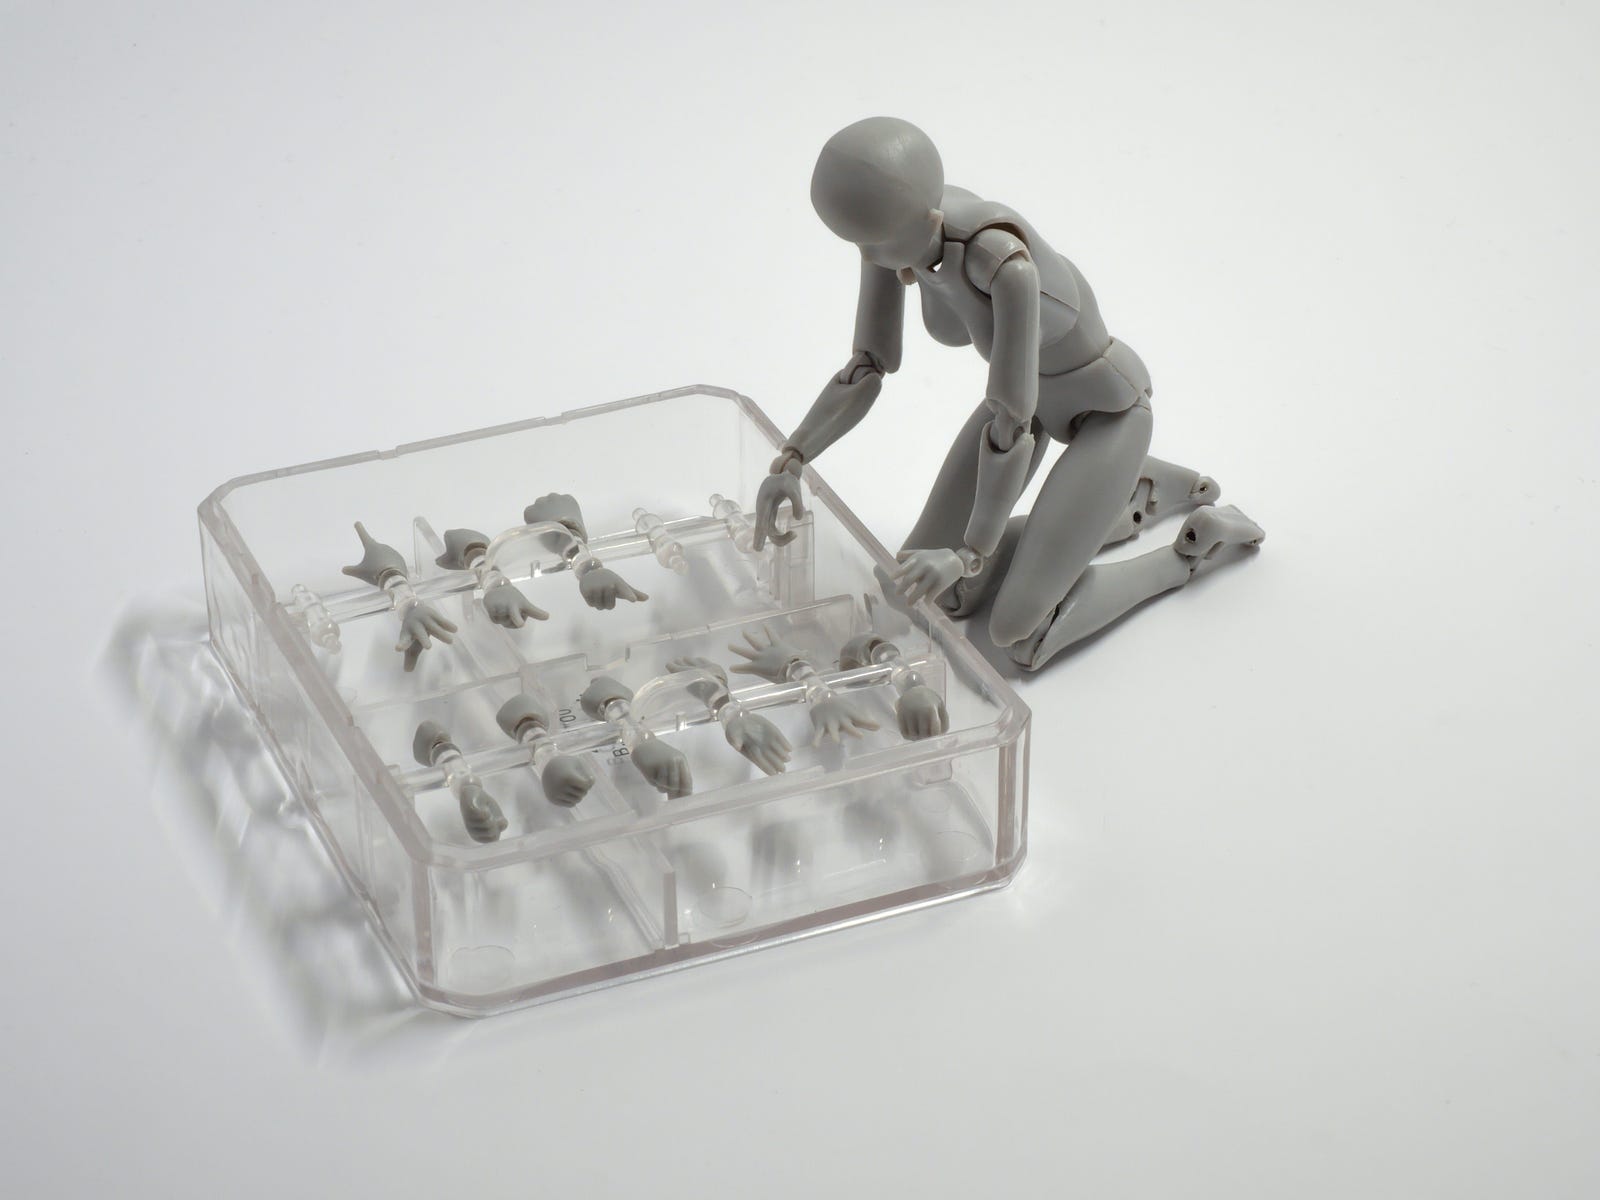 A toy figurine looks at a clear box, with sections each containing a body part that can snap into the figurine.